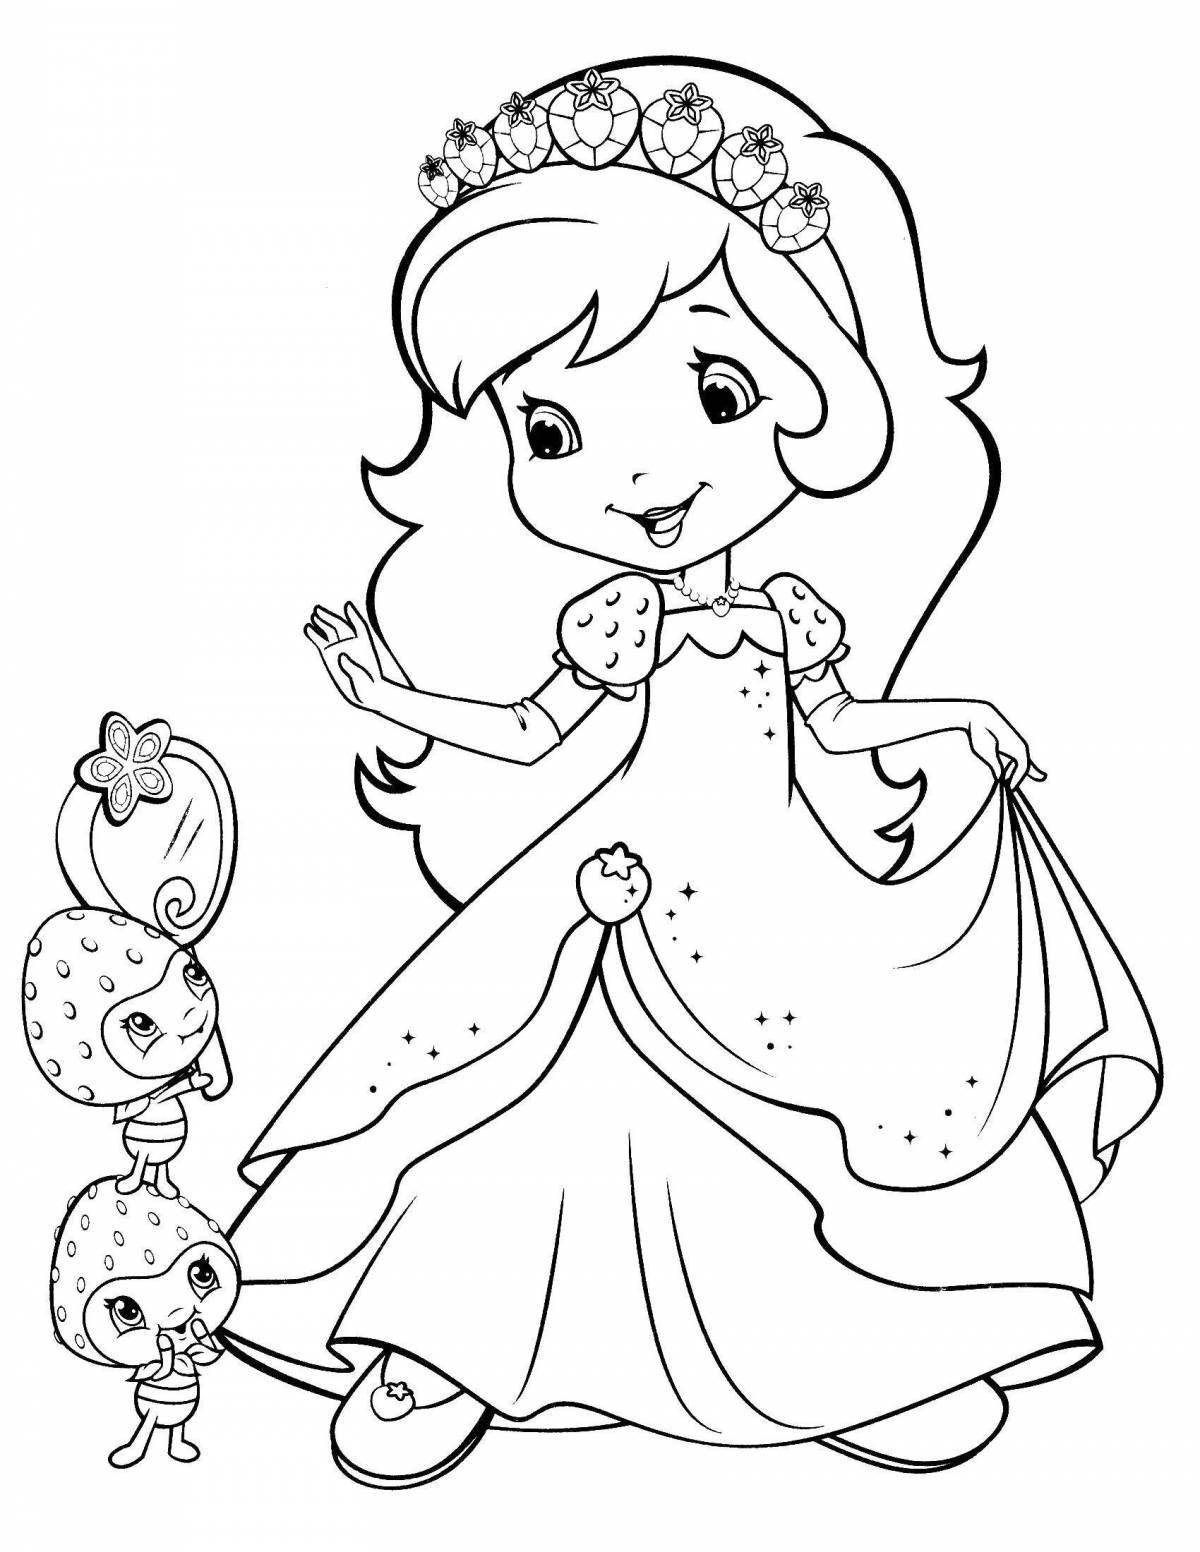 A wonderful coloring book for girls 3 years princess